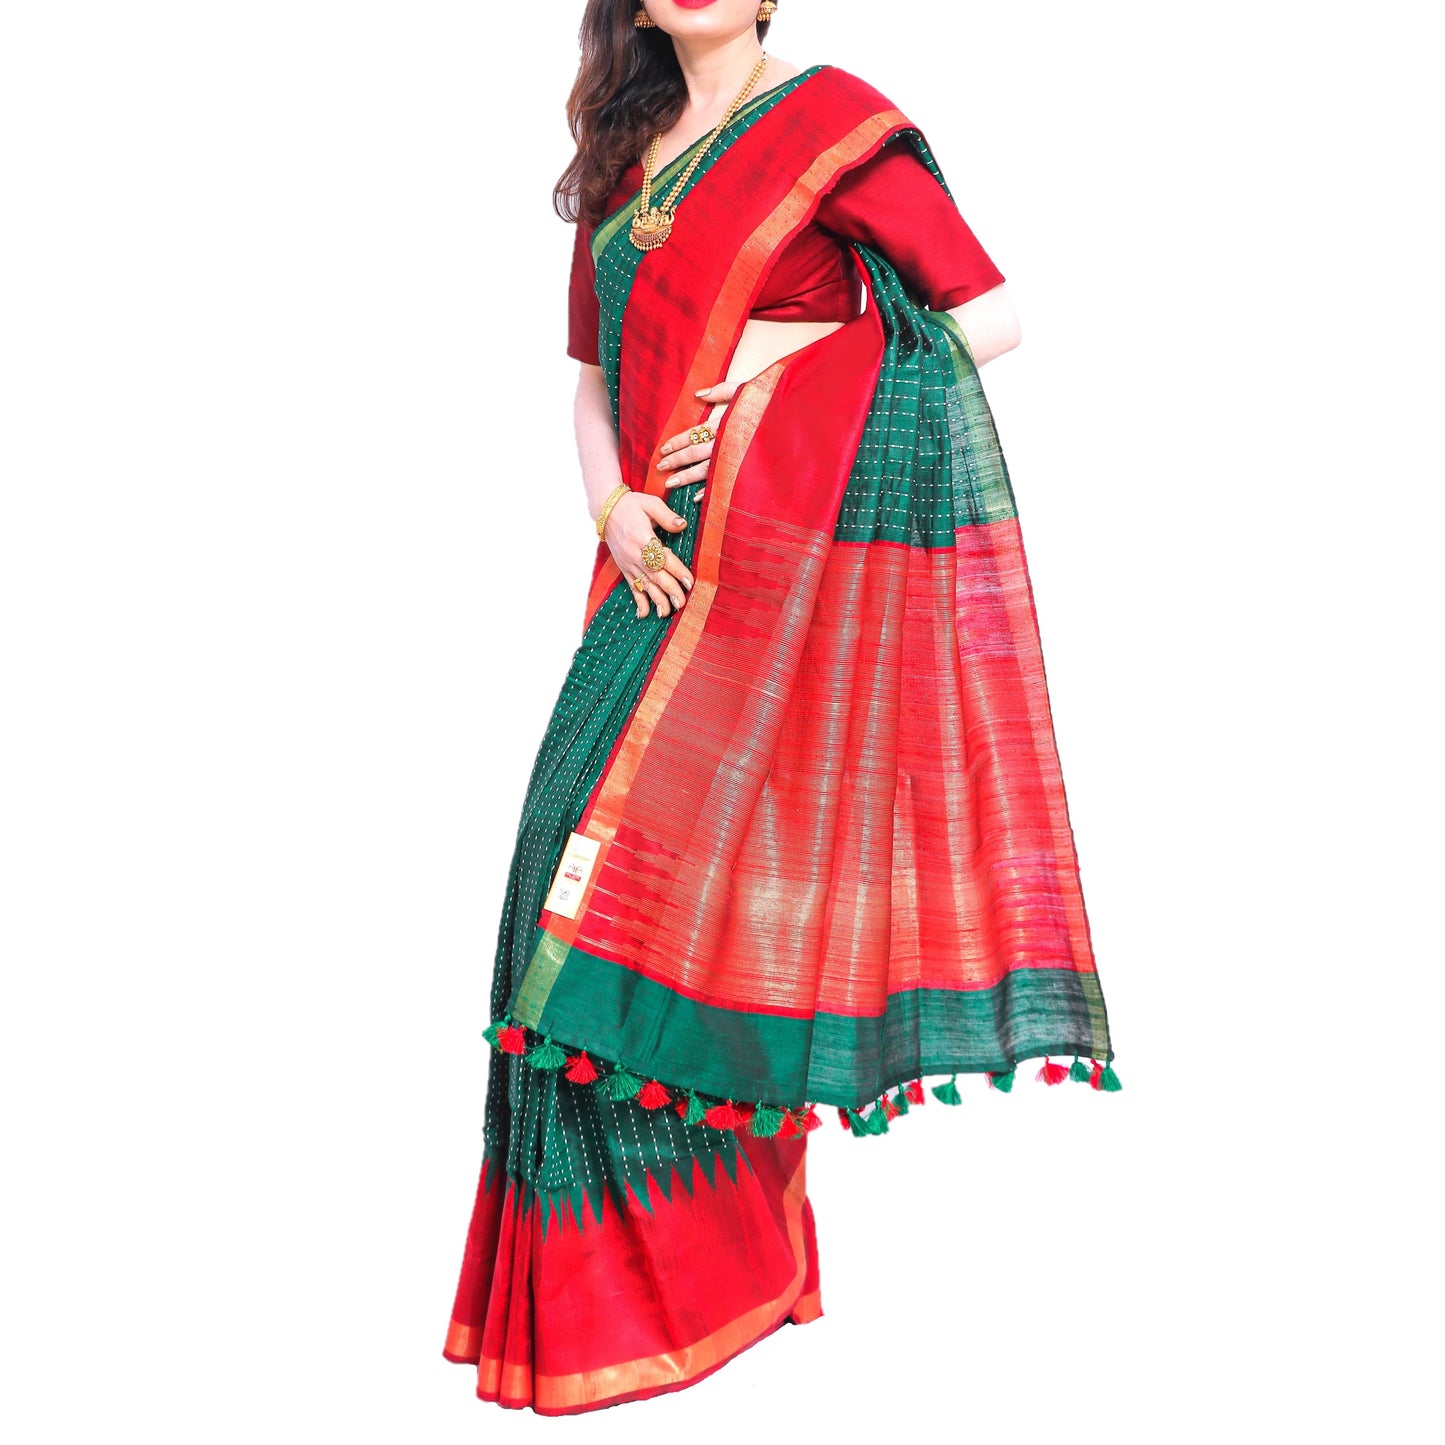 Pure Handloom Tussar Silk Saree - Bottle Green and Red with Temple Border